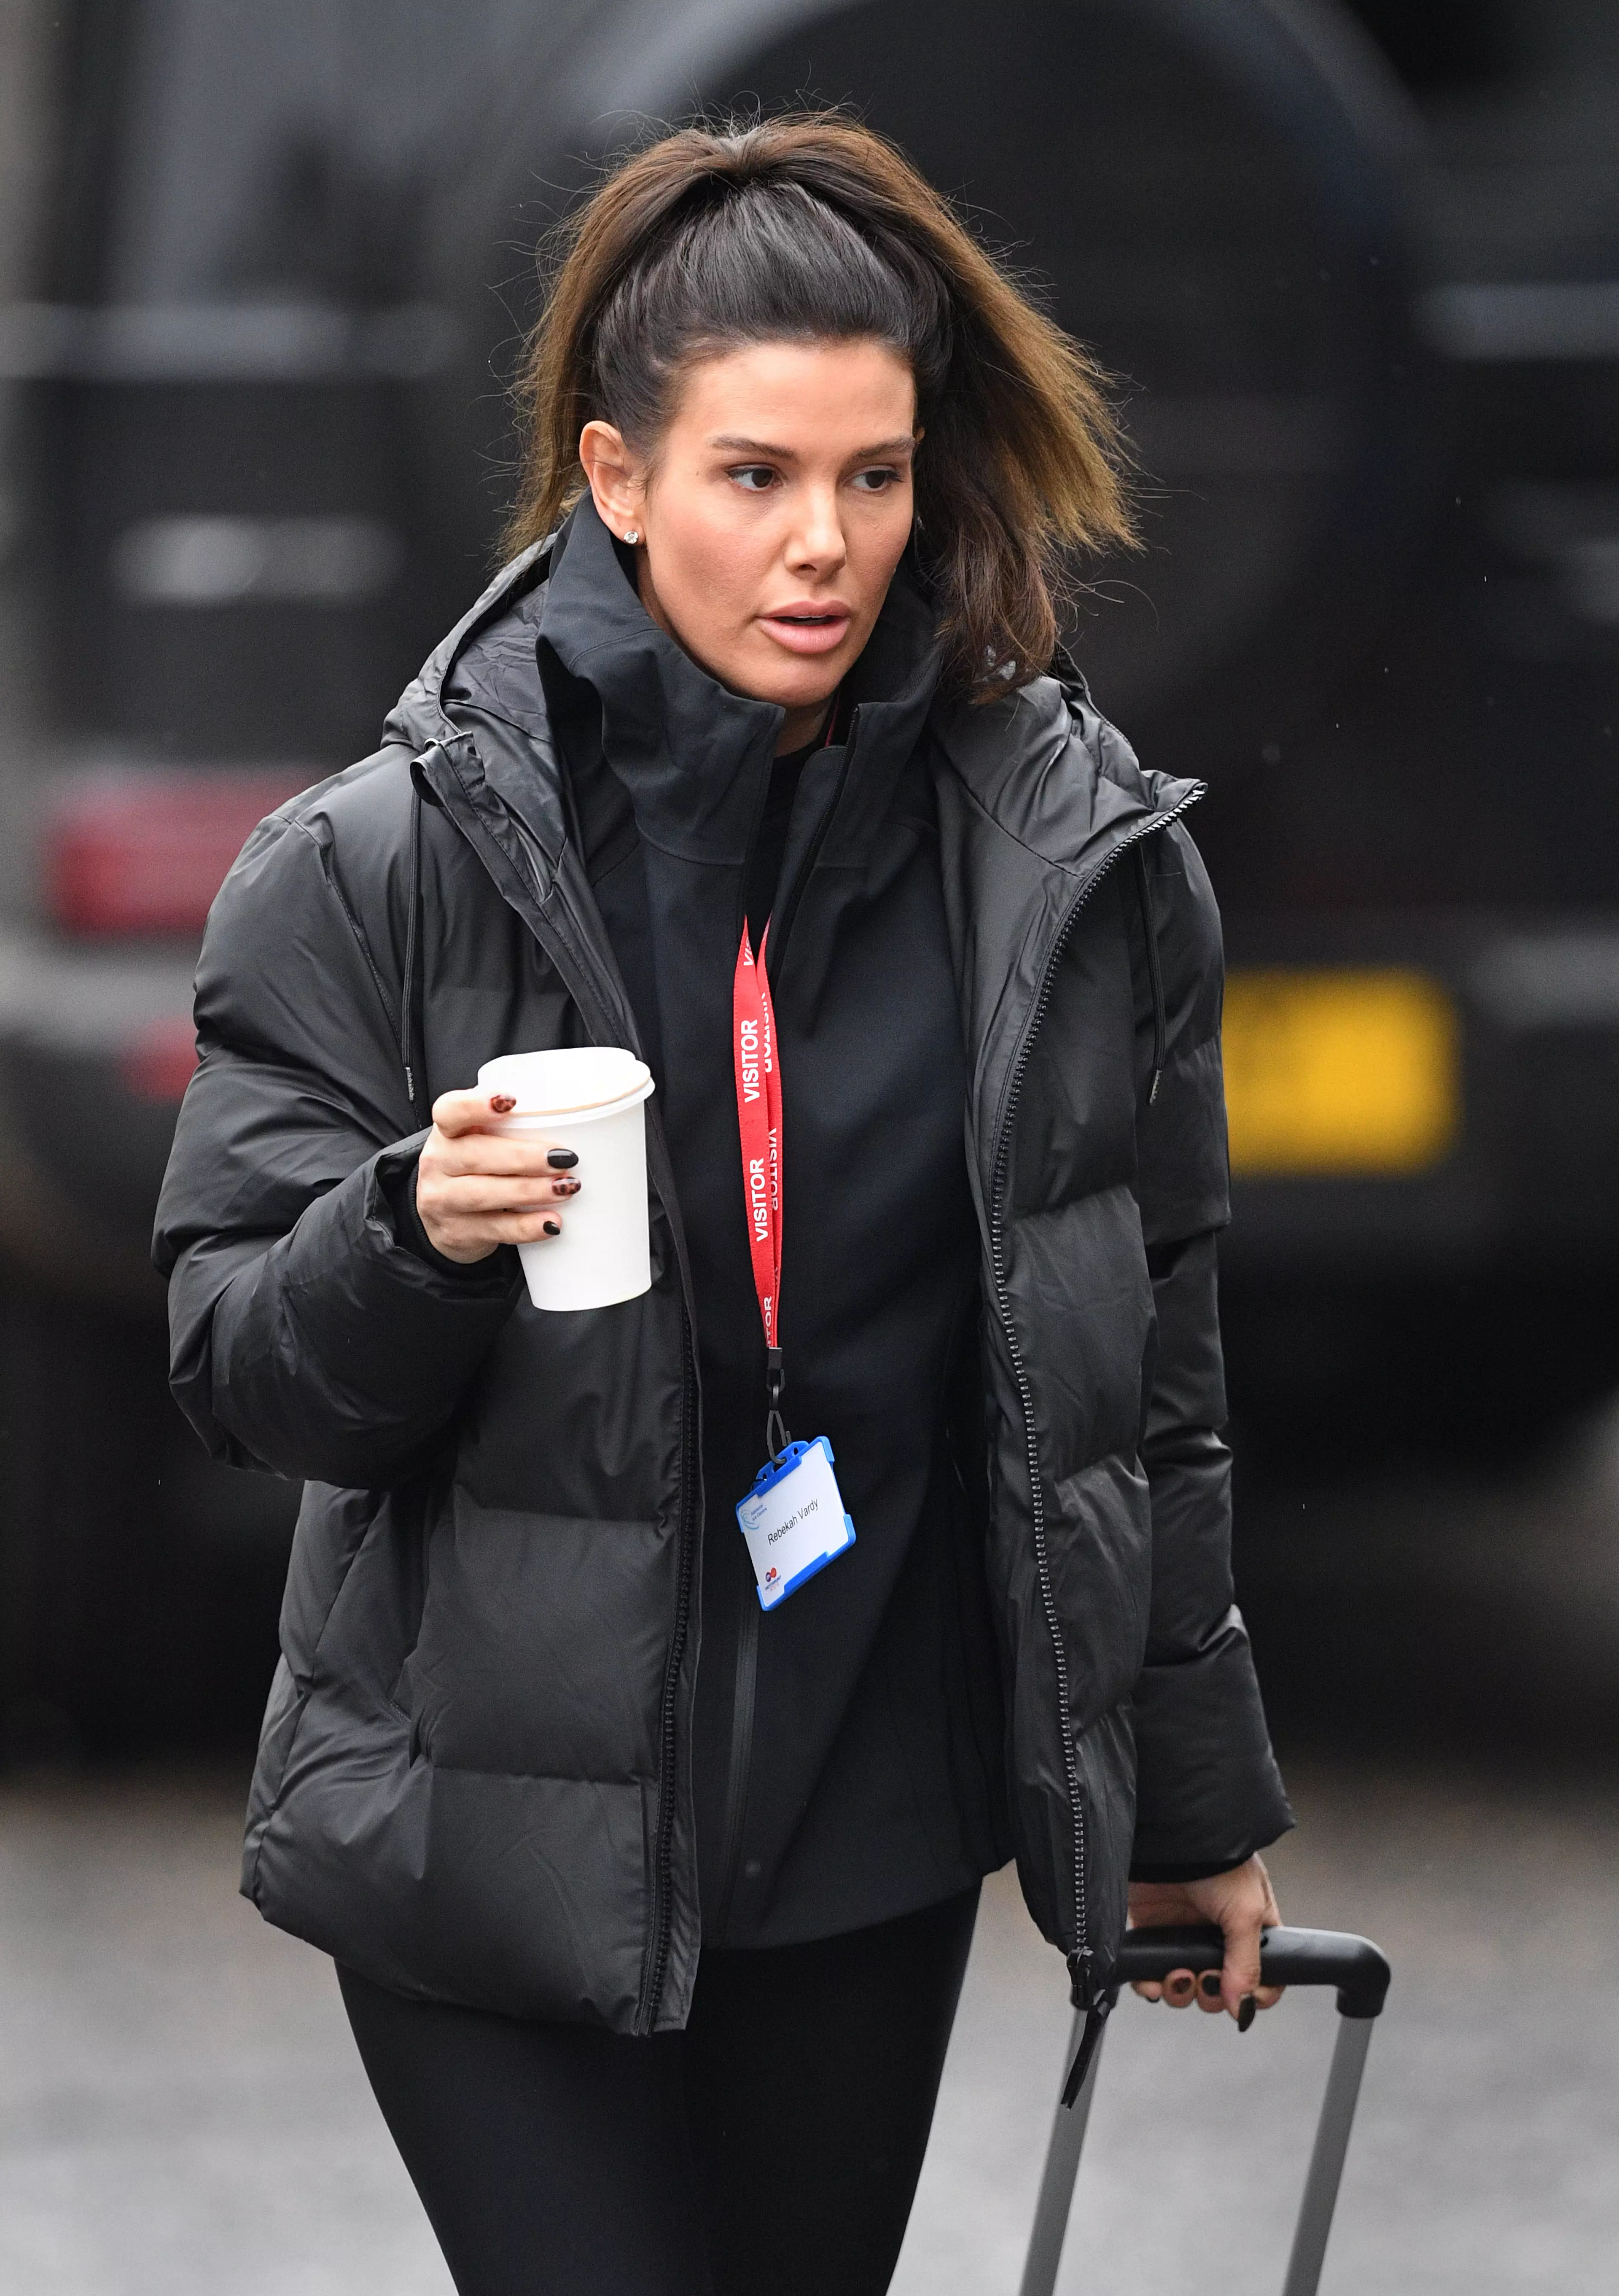 Rebekah Vardy has since apologised for the interview (